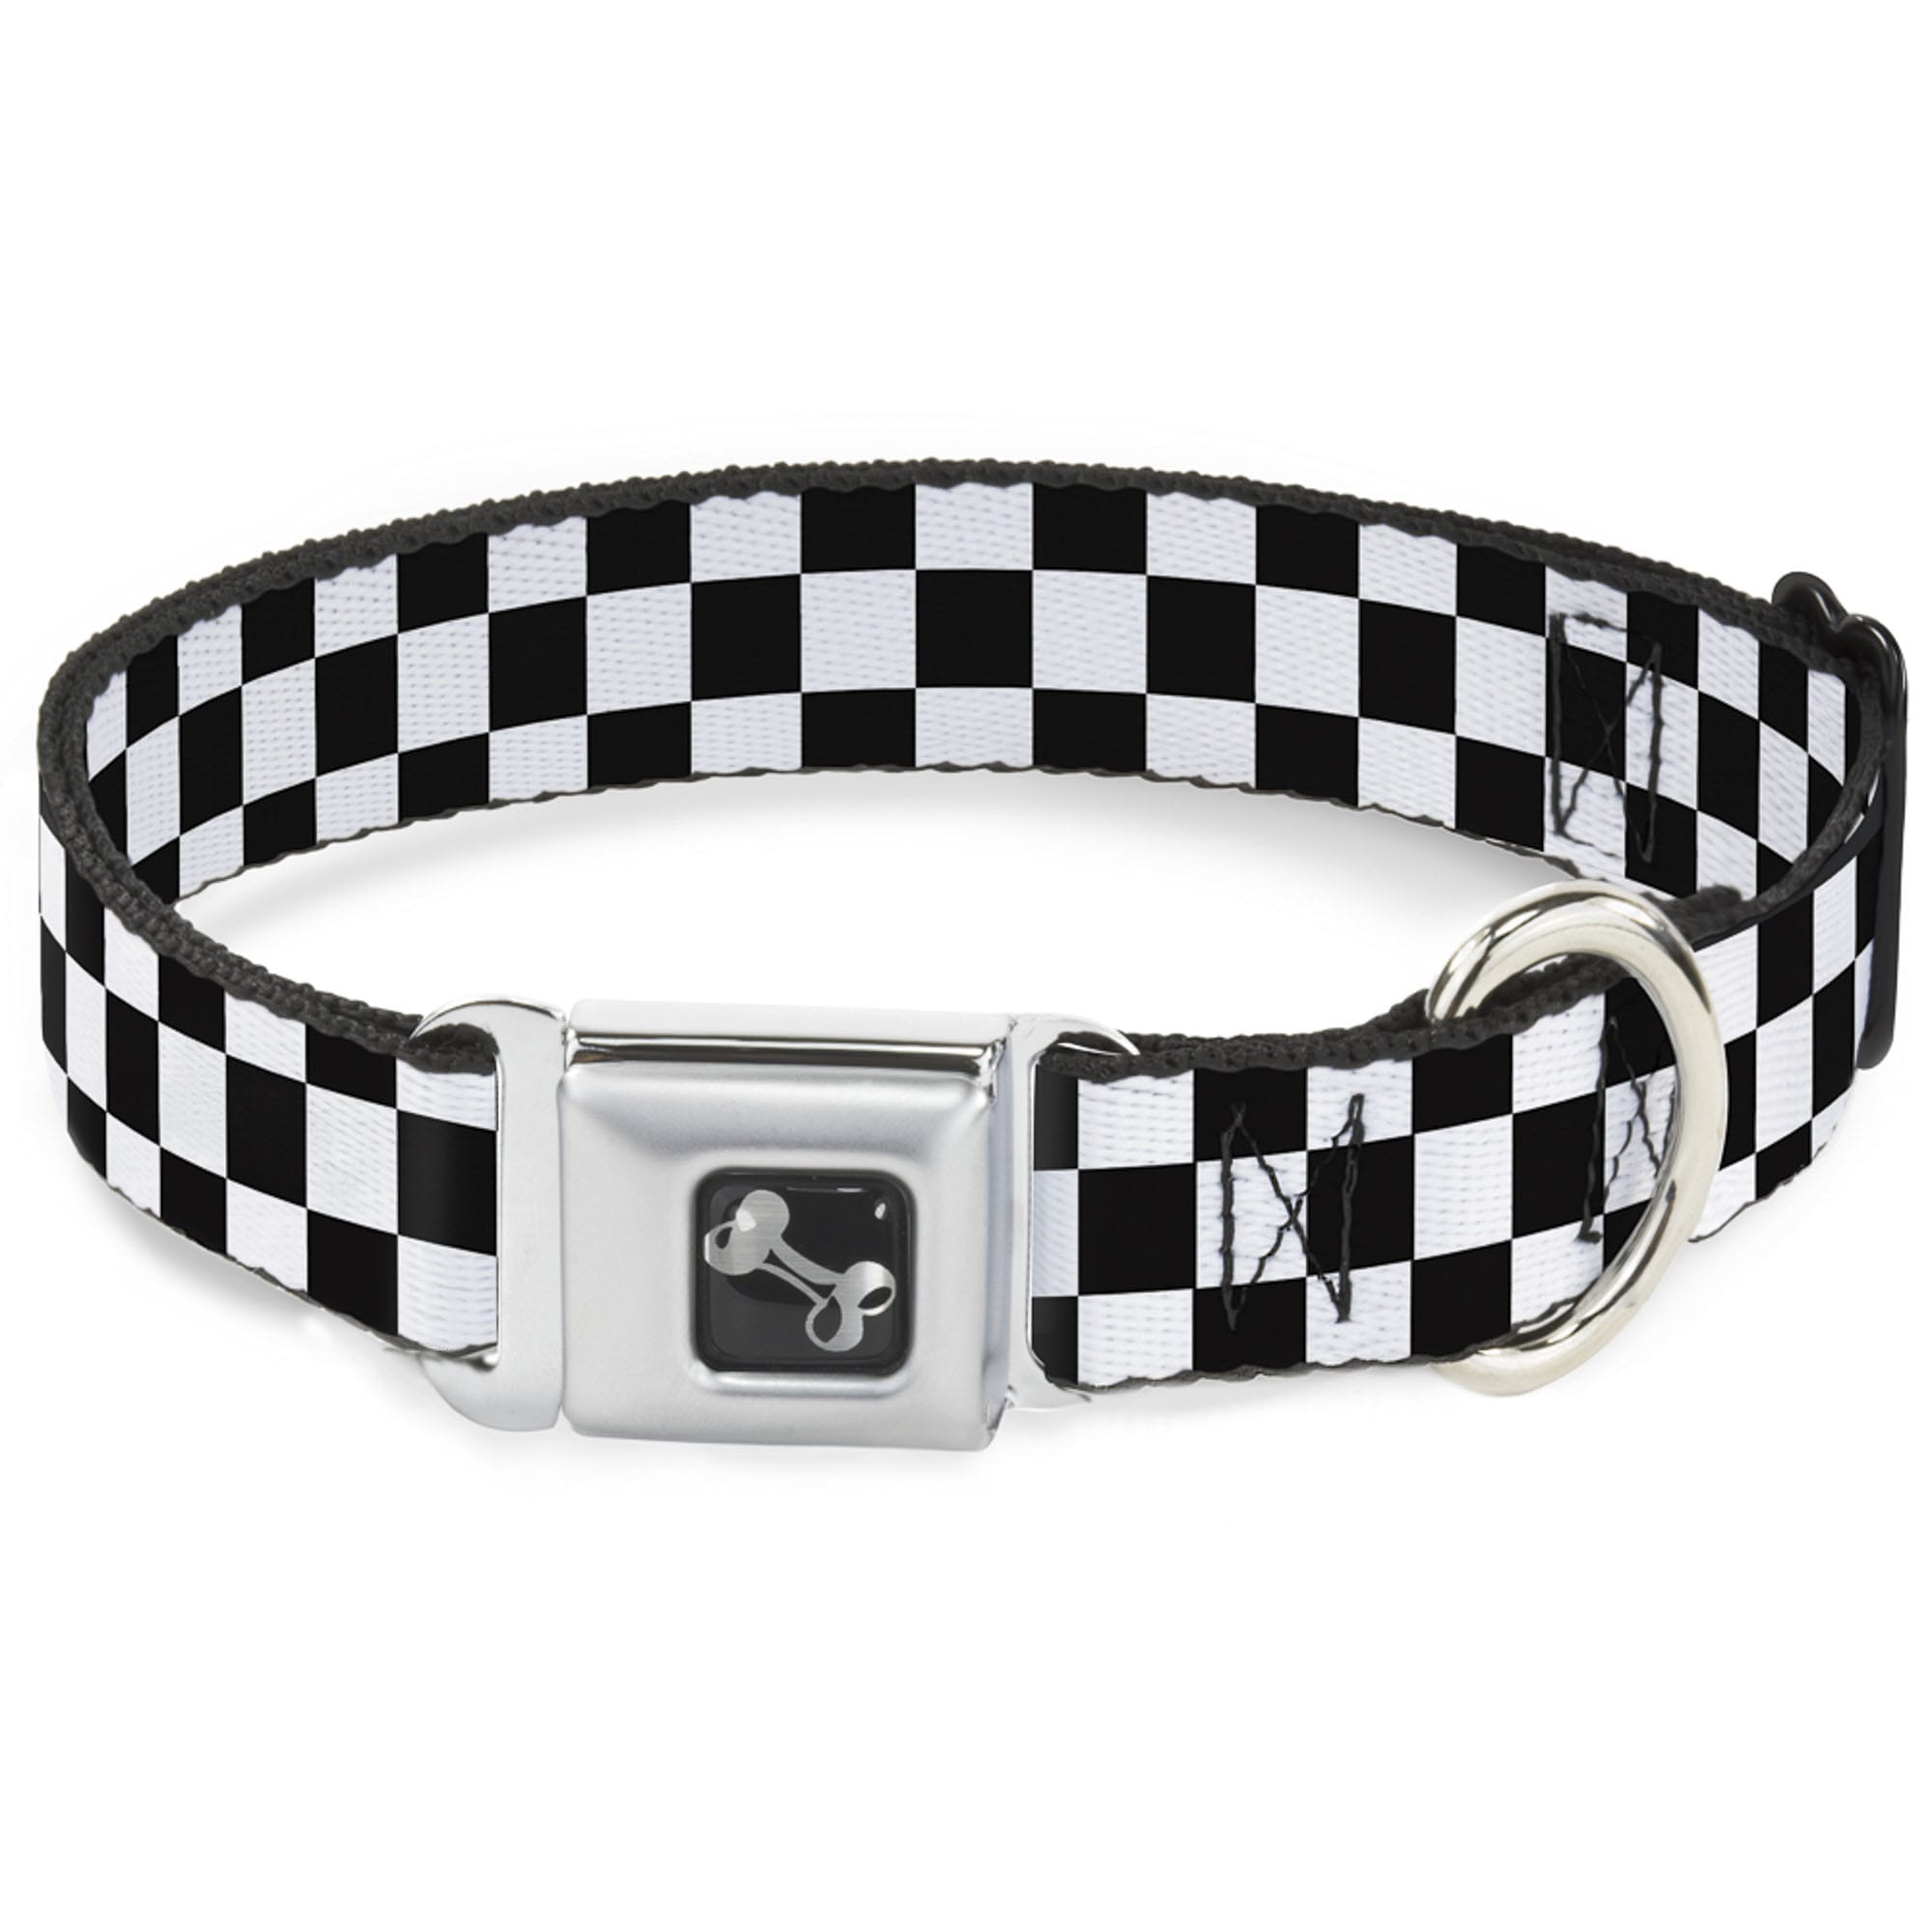 Buy Leather Dog Collar and Leash Set, Check Pattern Dog Collar Leashes  Metal Buckle Adjustable Durable for Small Medium Large Dogs (White,  S(11.4-13.4IN)) Online at Low Prices in India 